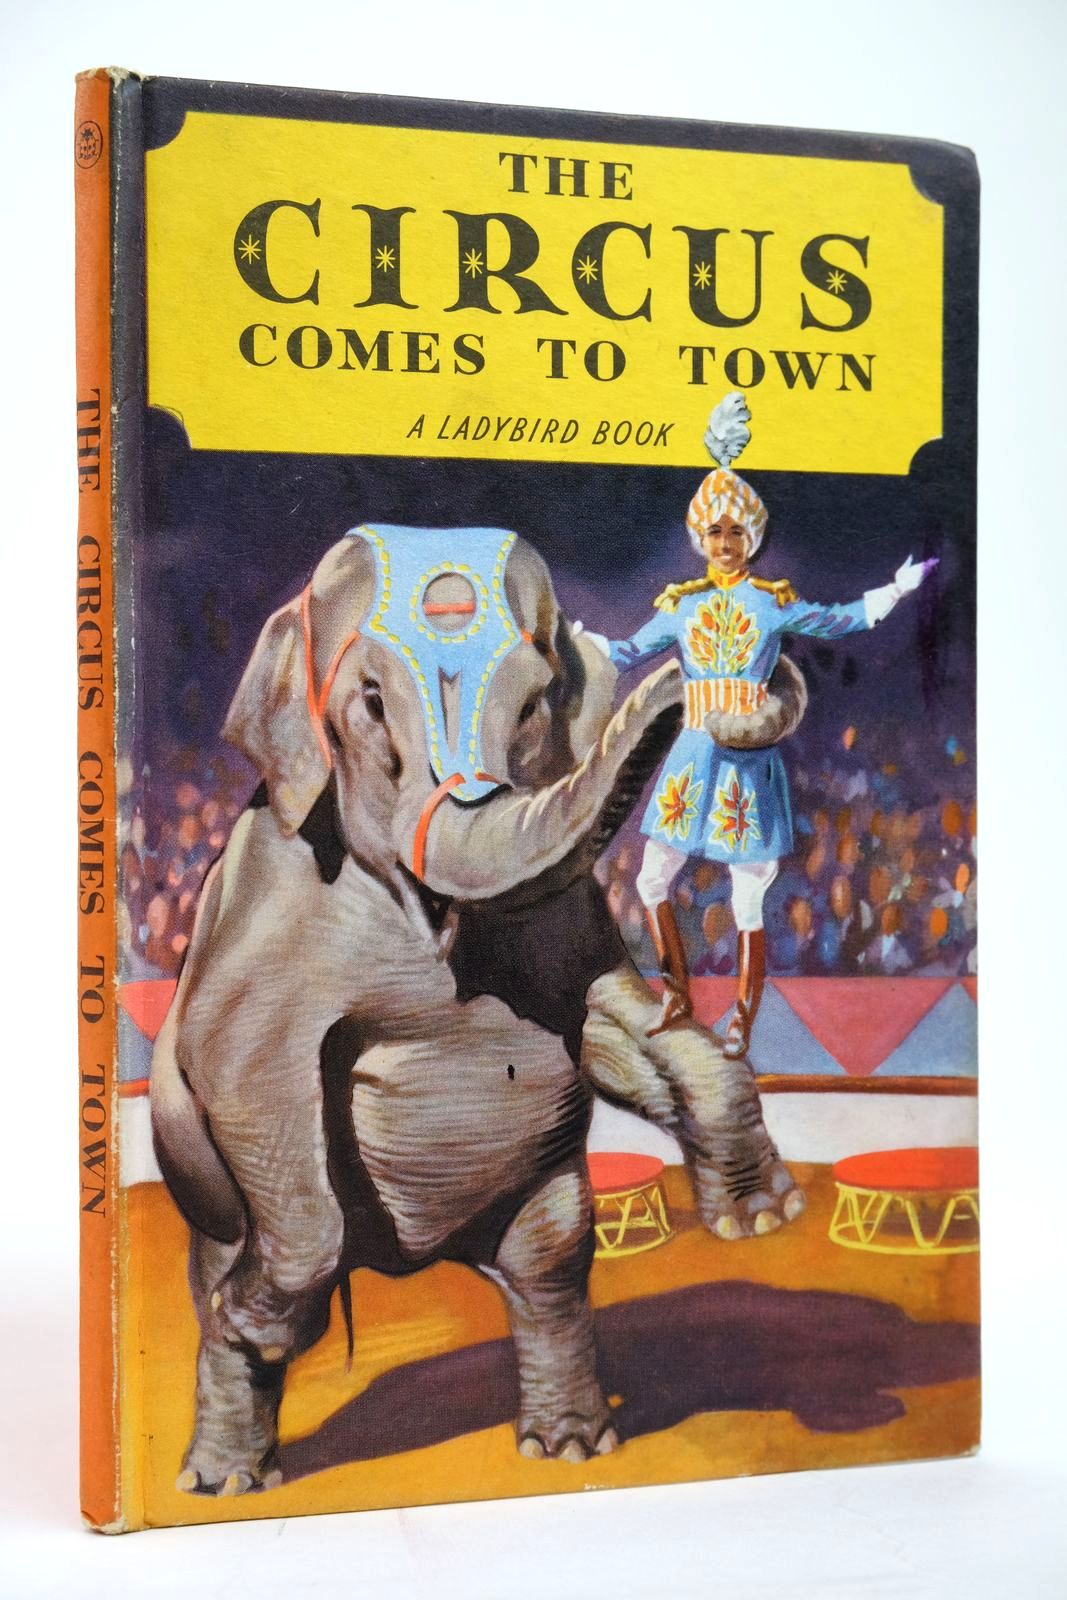 Photo of THE CIRCUS COMES TO TOWN written by Constanduros, Denis illustrated by Kenney, John published by Wills &amp; Hepworth Ltd. (STOCK CODE: 2135162)  for sale by Stella & Rose's Books